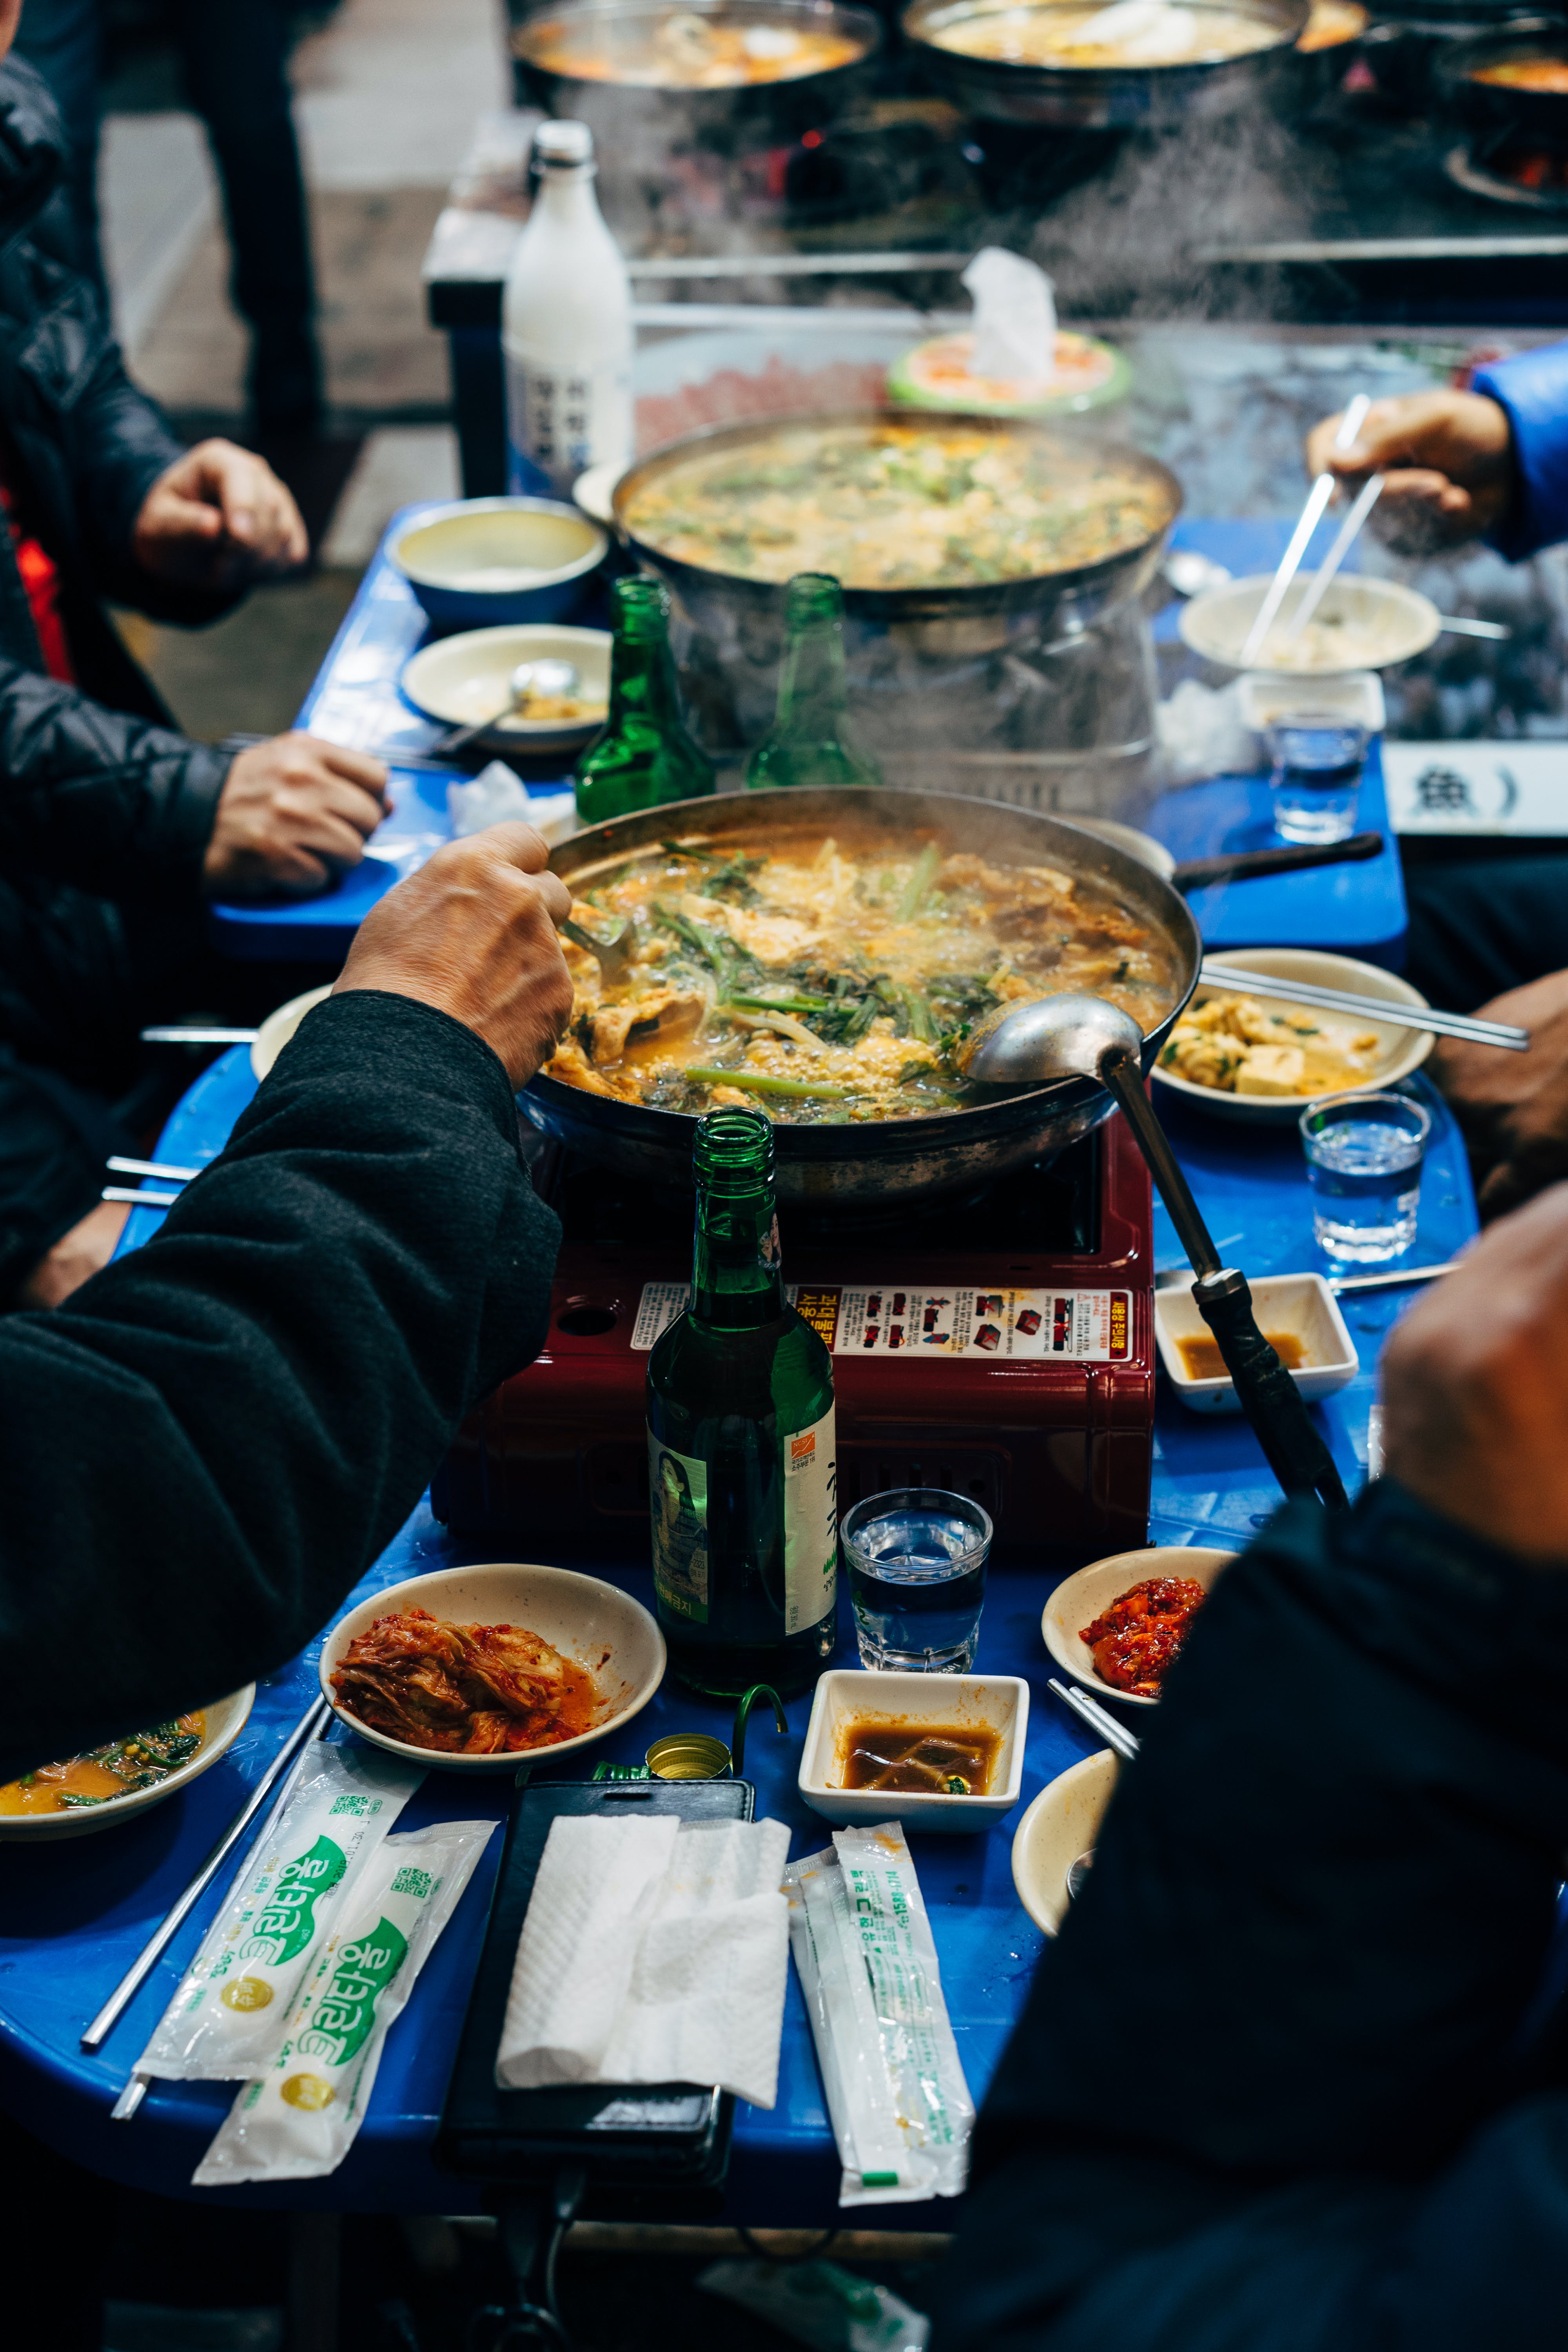 A group of people enjoying a meal together | Source: Pexels